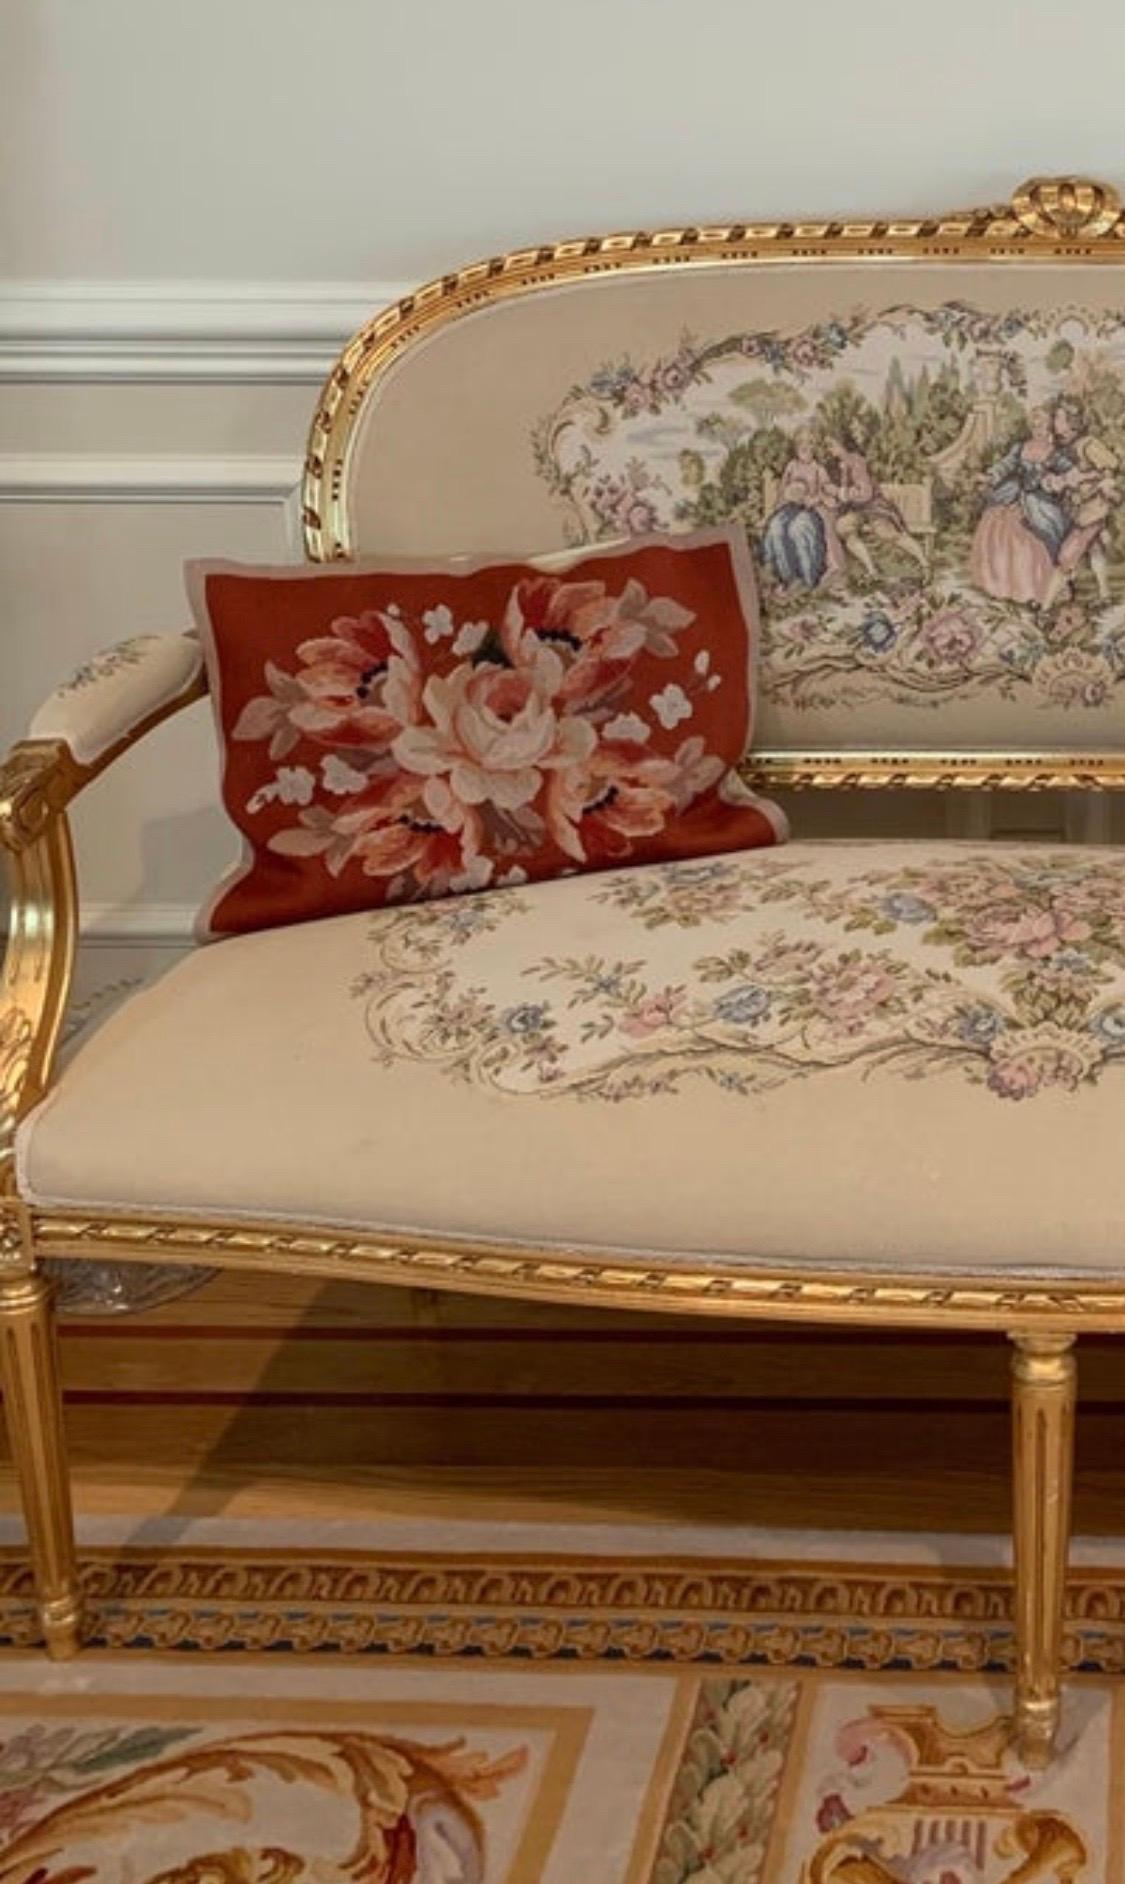 Late 20th Century Floral French Provincial Needlepoint Lumbar Pillow For Sale